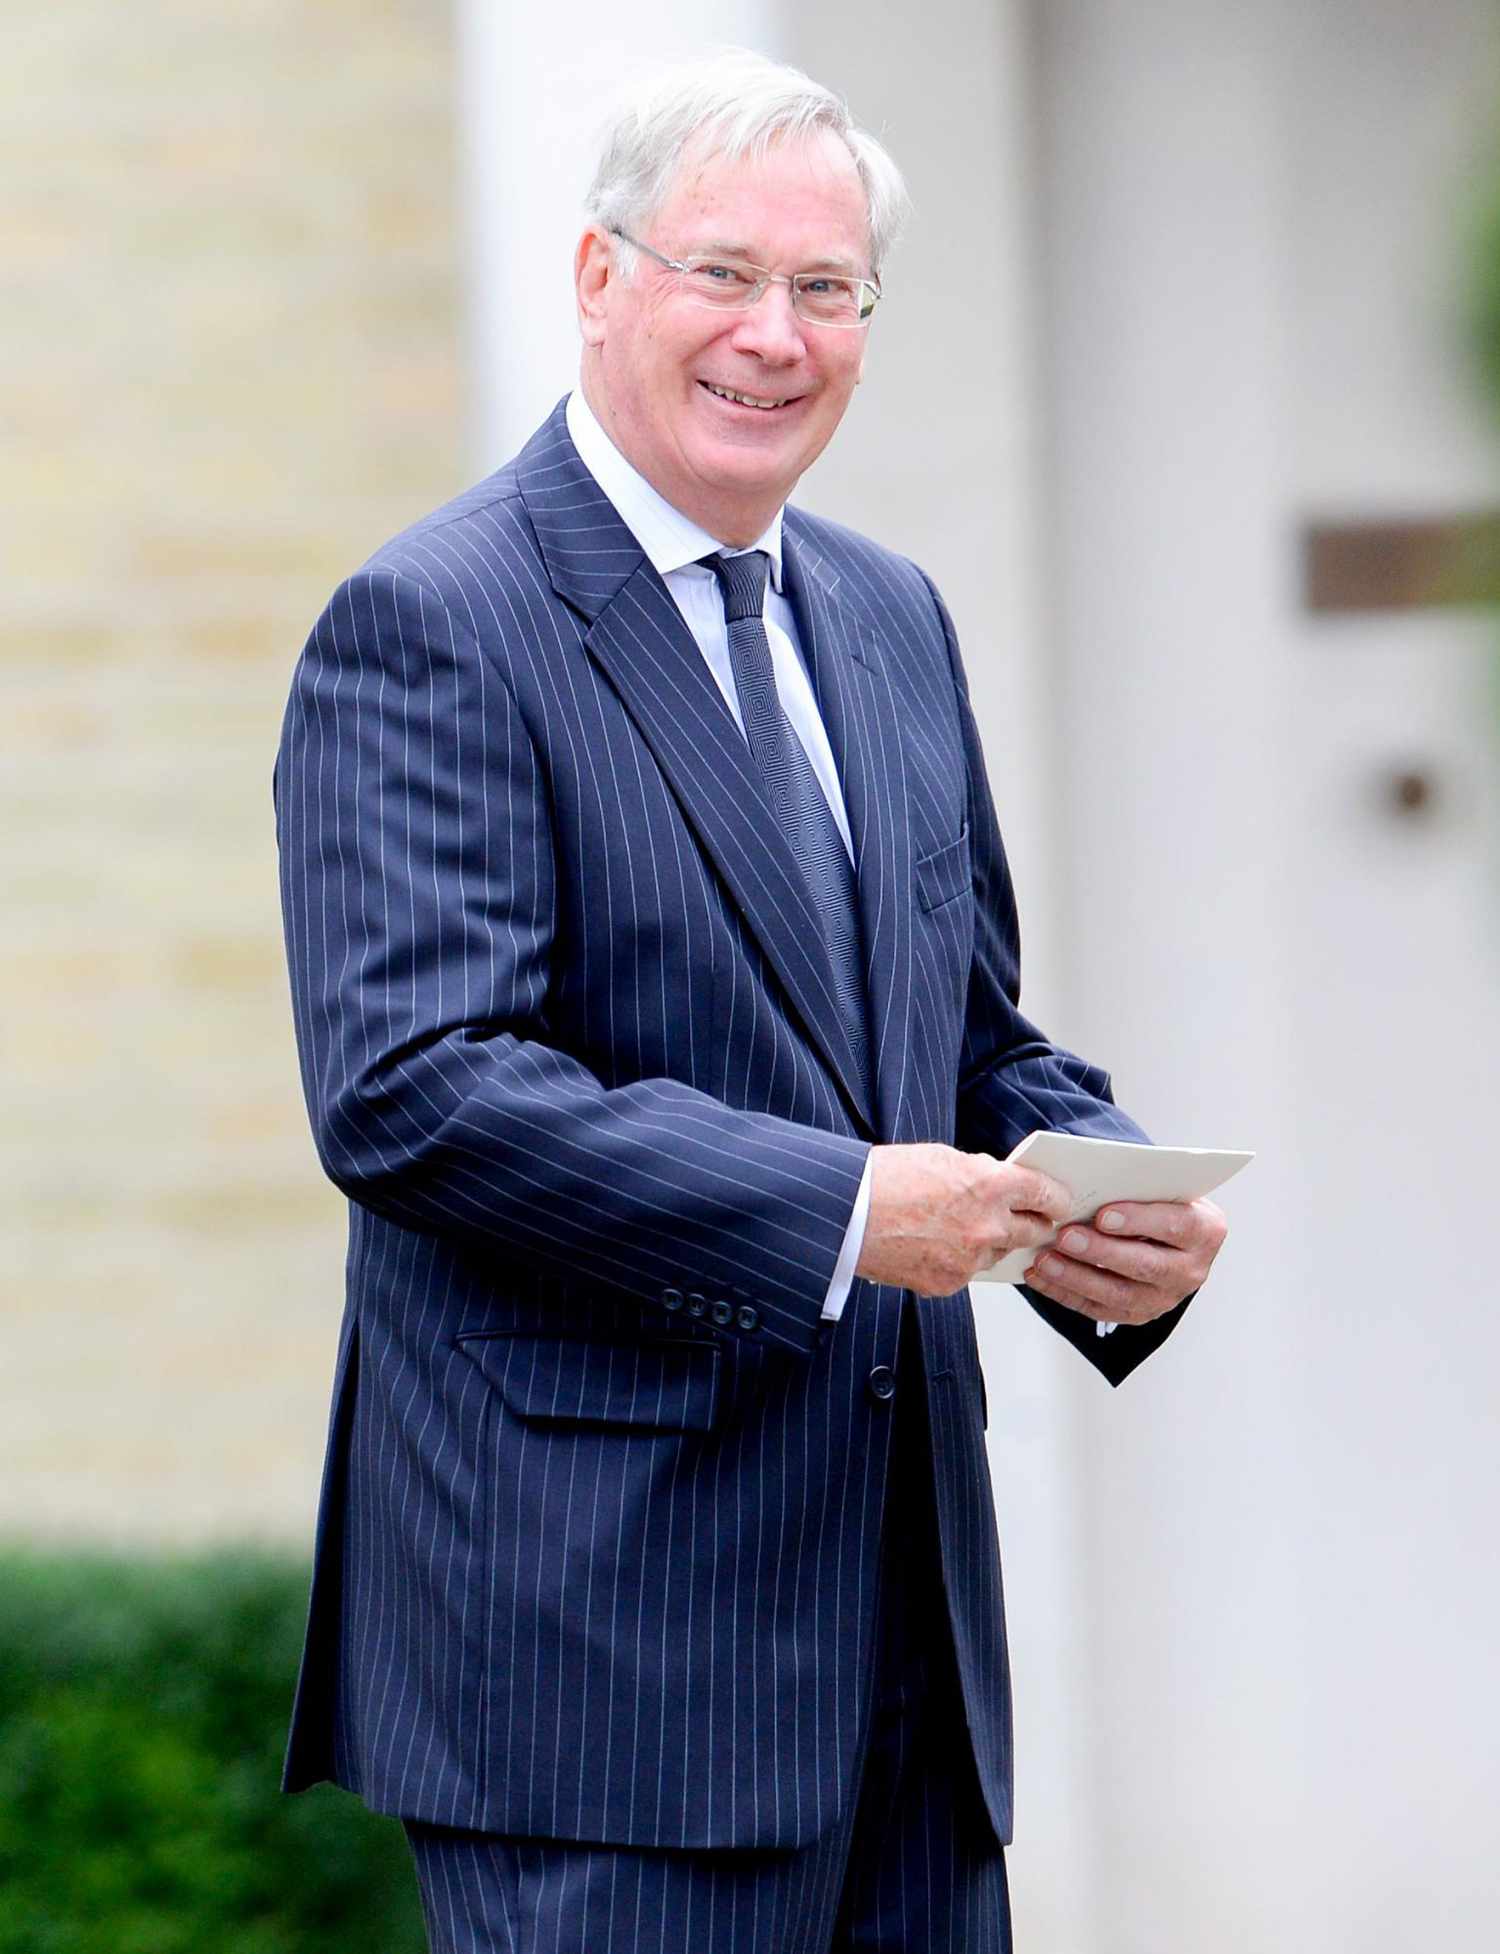 <p>The son of Prince Henry, Duke of Gloucester, and Lady Alice Montagu Douglas Scott. He is currently 31st in the line of succession to the British throne as well as the first in line not descended from the Queen's father, King George VI.</p>
                            